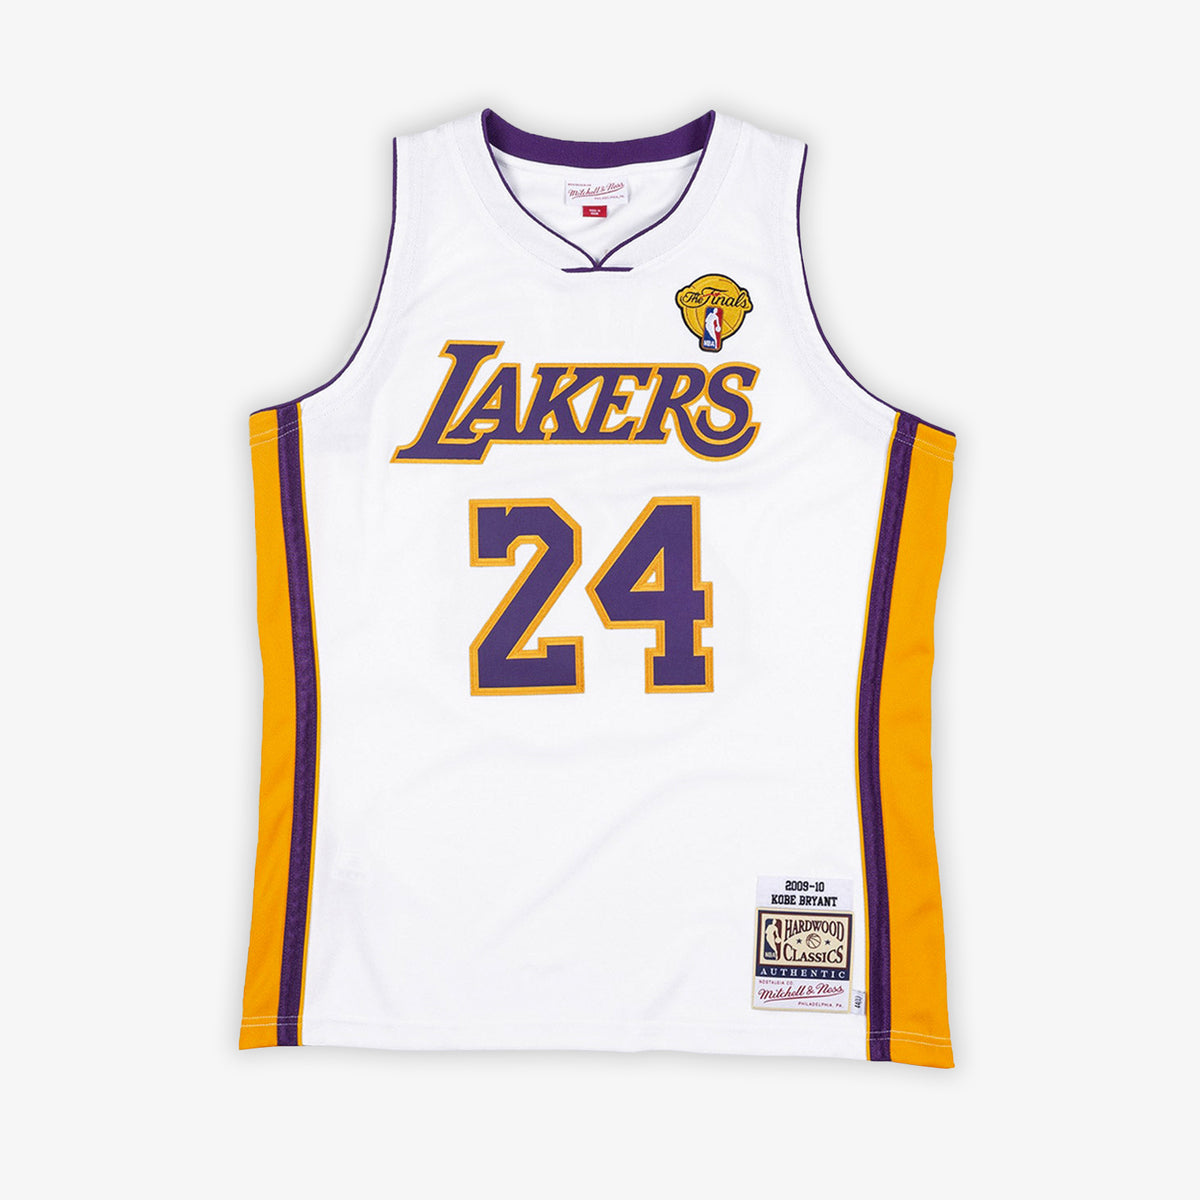 Kobe Bryant Los Angeles Lakers Alternate 09-10 NBA Finals Authentic Hardwood Classic Jersey - White